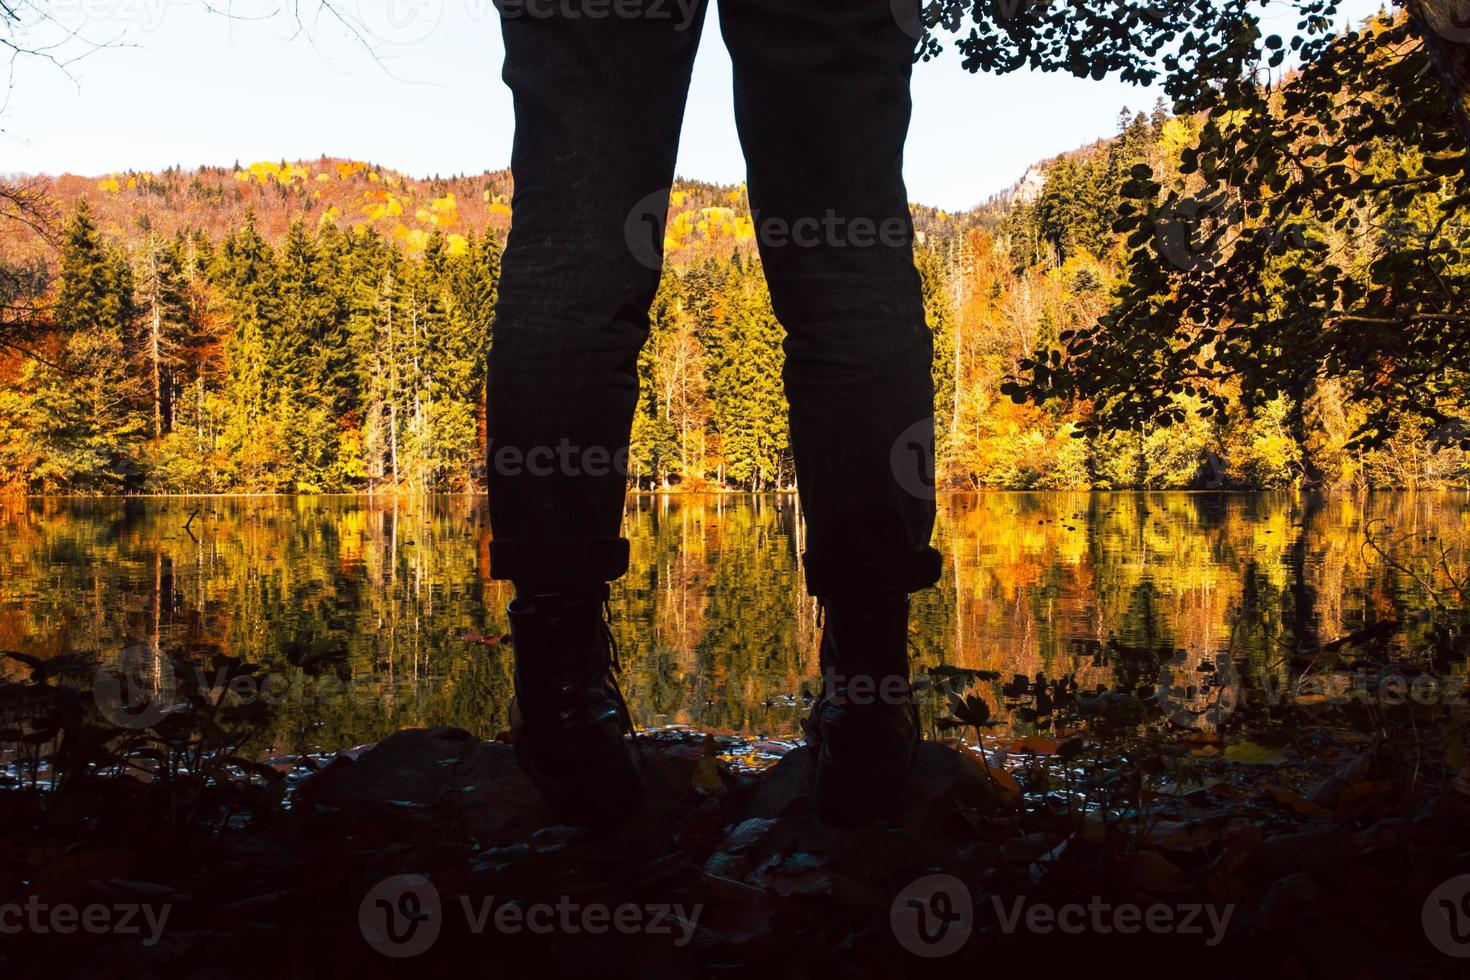 Close up low angle view silhouette of female legs and boots by scenic lake with outdoors in fall nature. Apparel in nature and autumn fashion concept photo